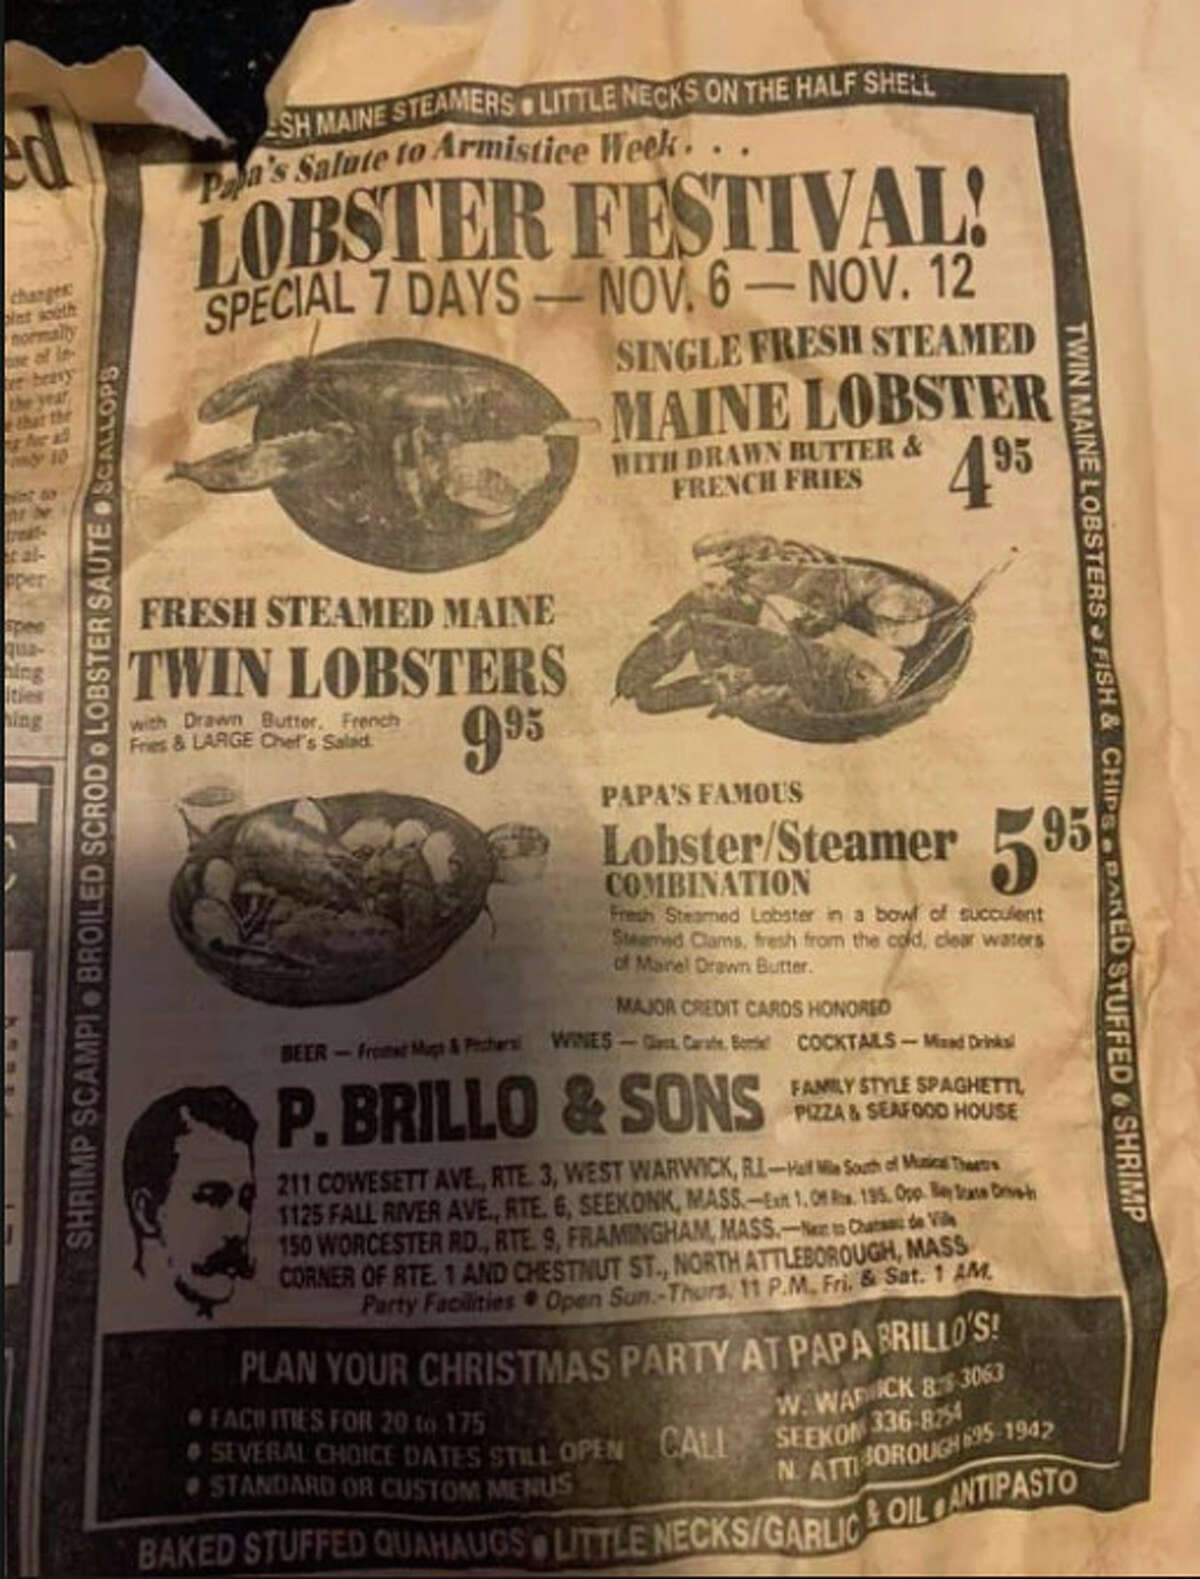 An ad from the original P. Brillo & Sons chain of New England Italian restaurants of the 1970s and 1980s. It inspired Papa Brillo's, a new restaurant in the Sterup Square plaza in Pittstown.